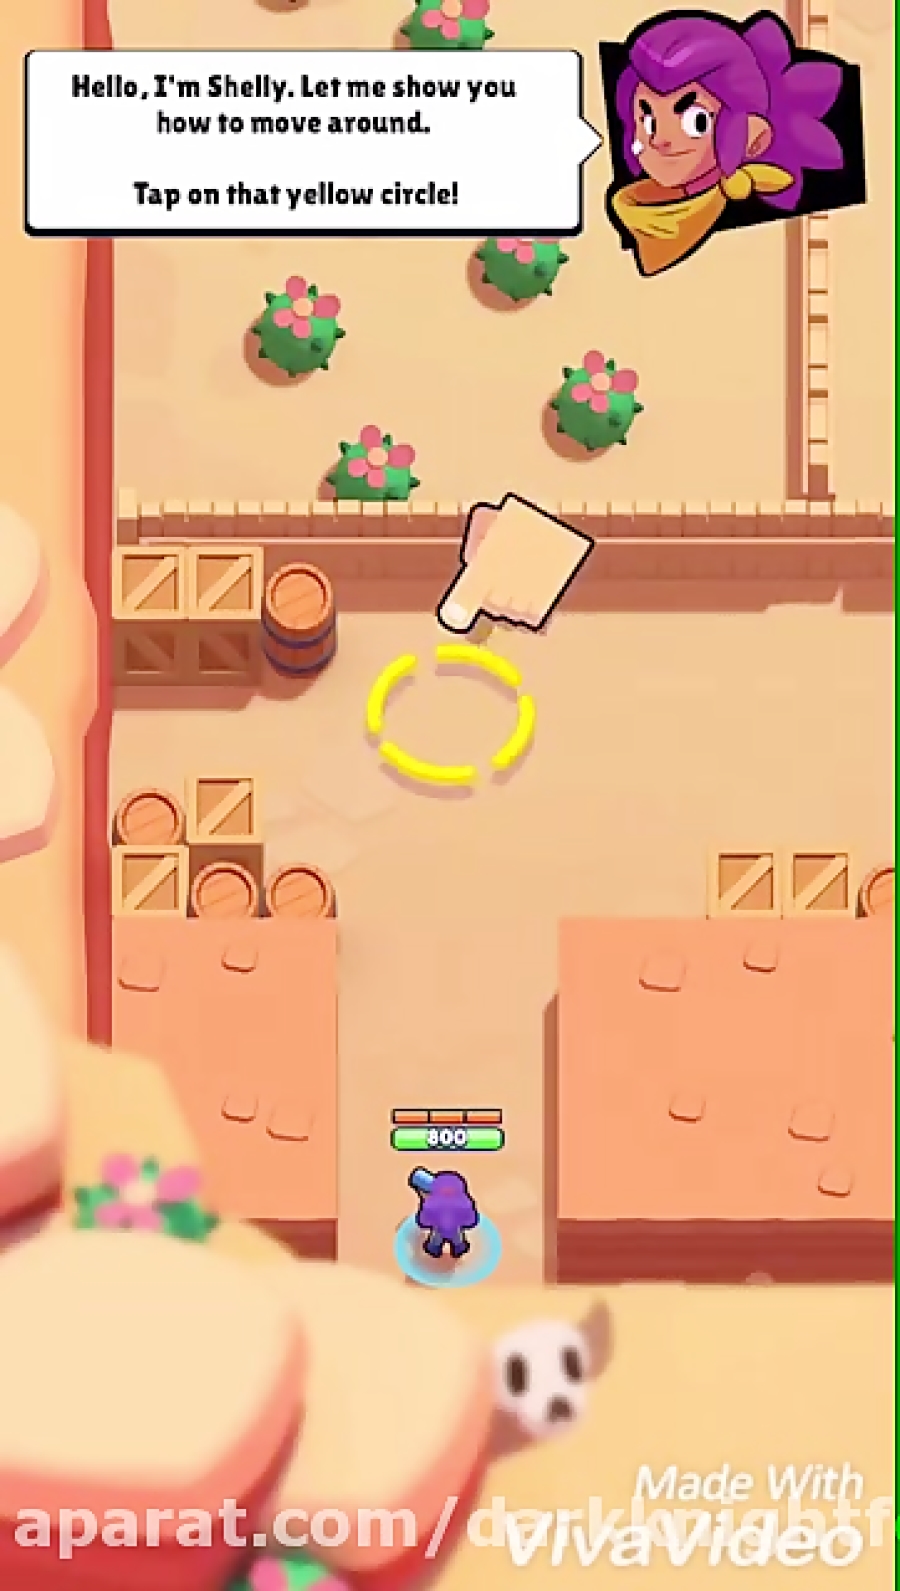 brawl stars gameplay dynamic duel early acces